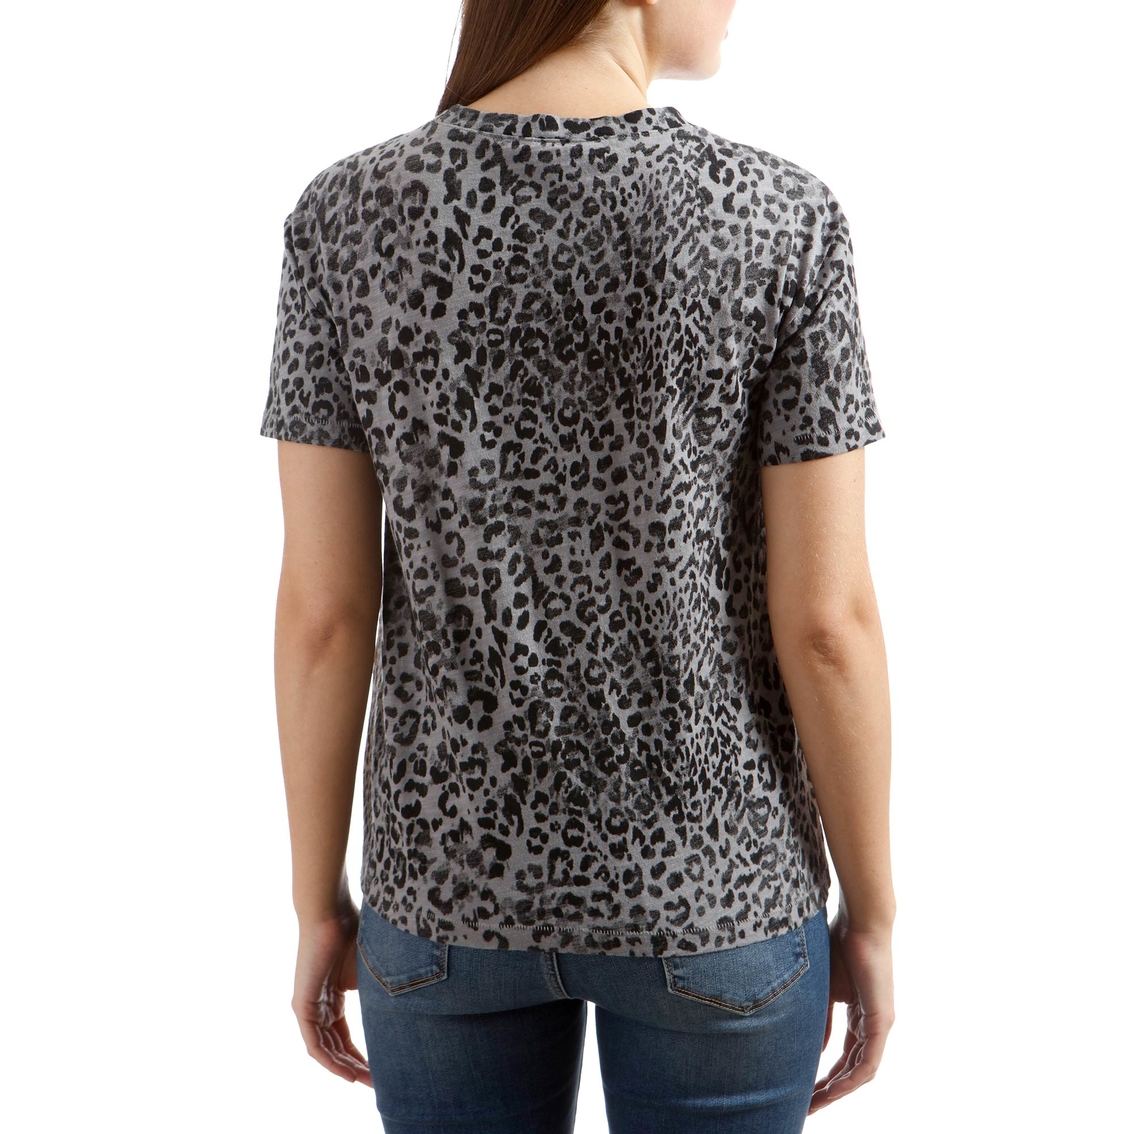 Lucky Brand Leopard Print Tee, Tops, Clothing & Accessories